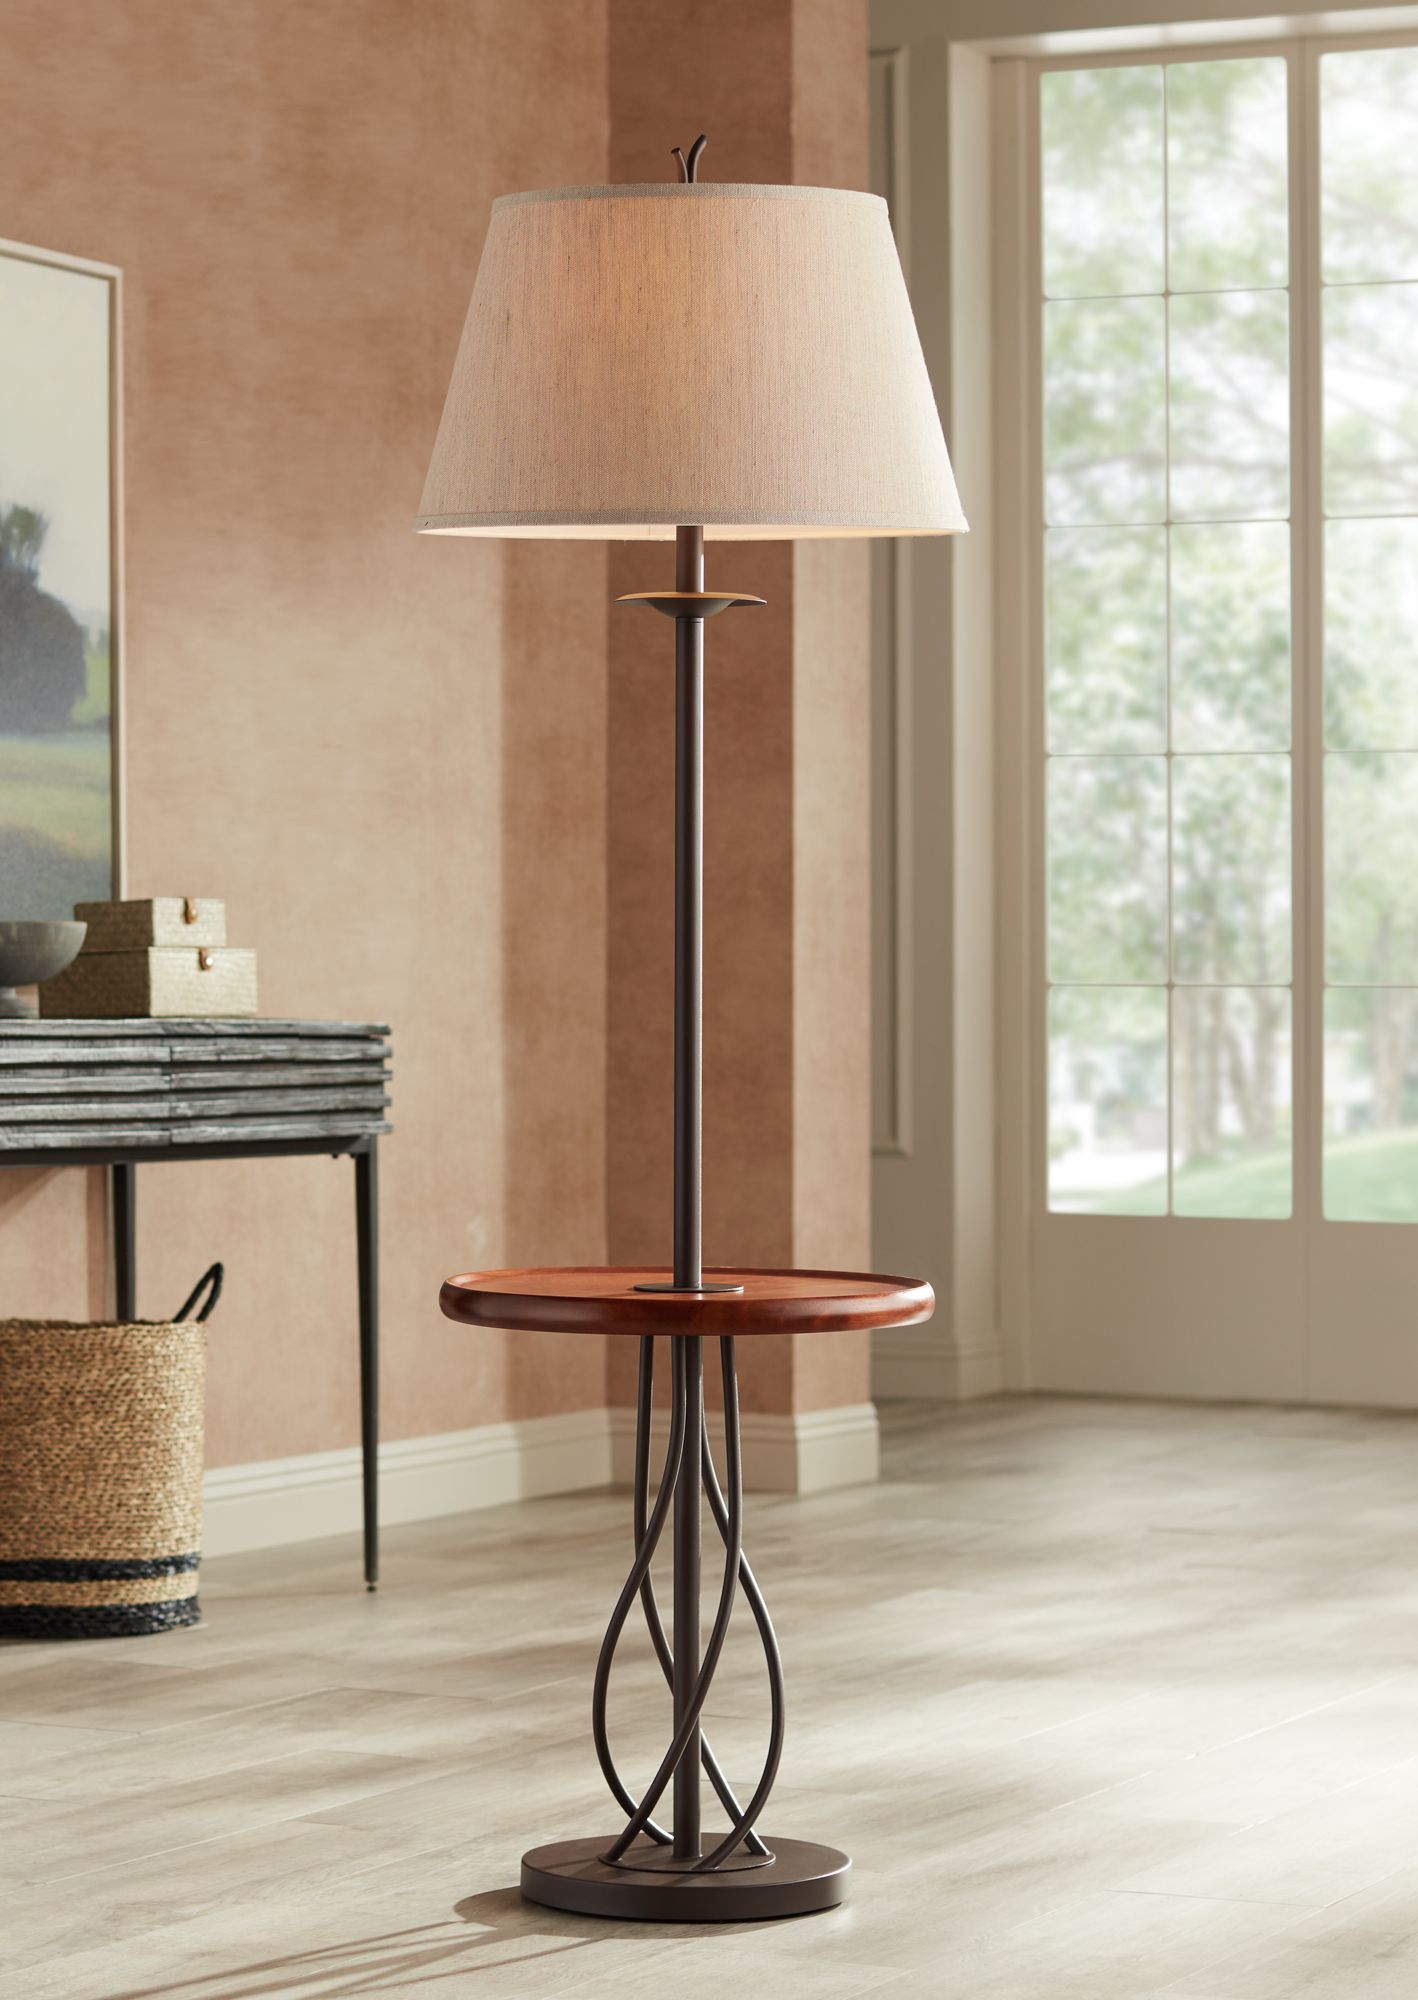 end table with lamp attached